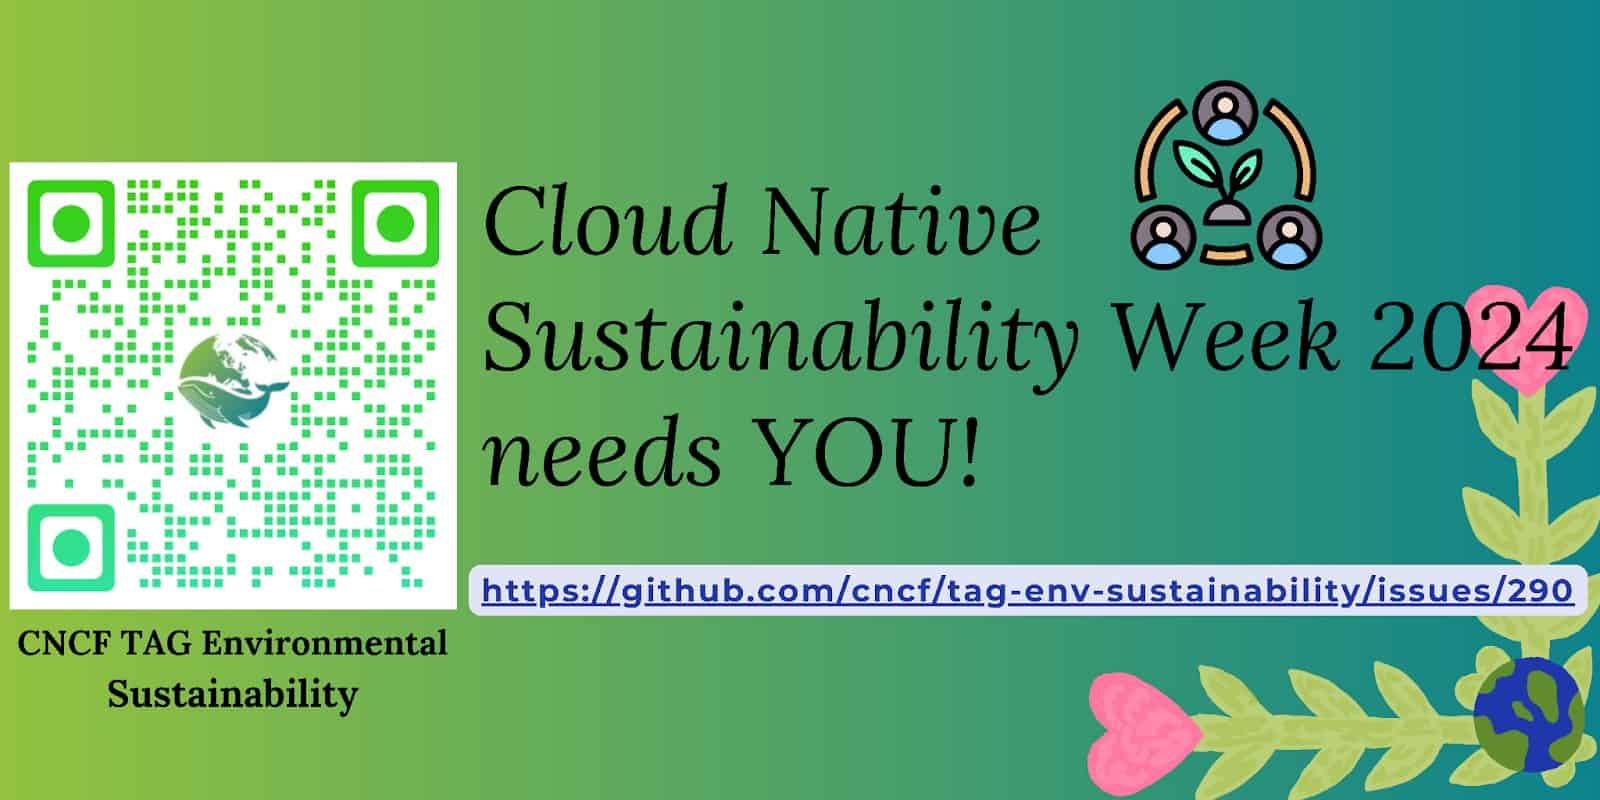 Banner for encouraging to support and contribute to CNCF TAG Environmental Sustainability Cloud Native Sustainability Week 2024 by joining discussion in the dedicated GitHub issue: https://github.com/cncf/tag-env-sustainability/issues/290 